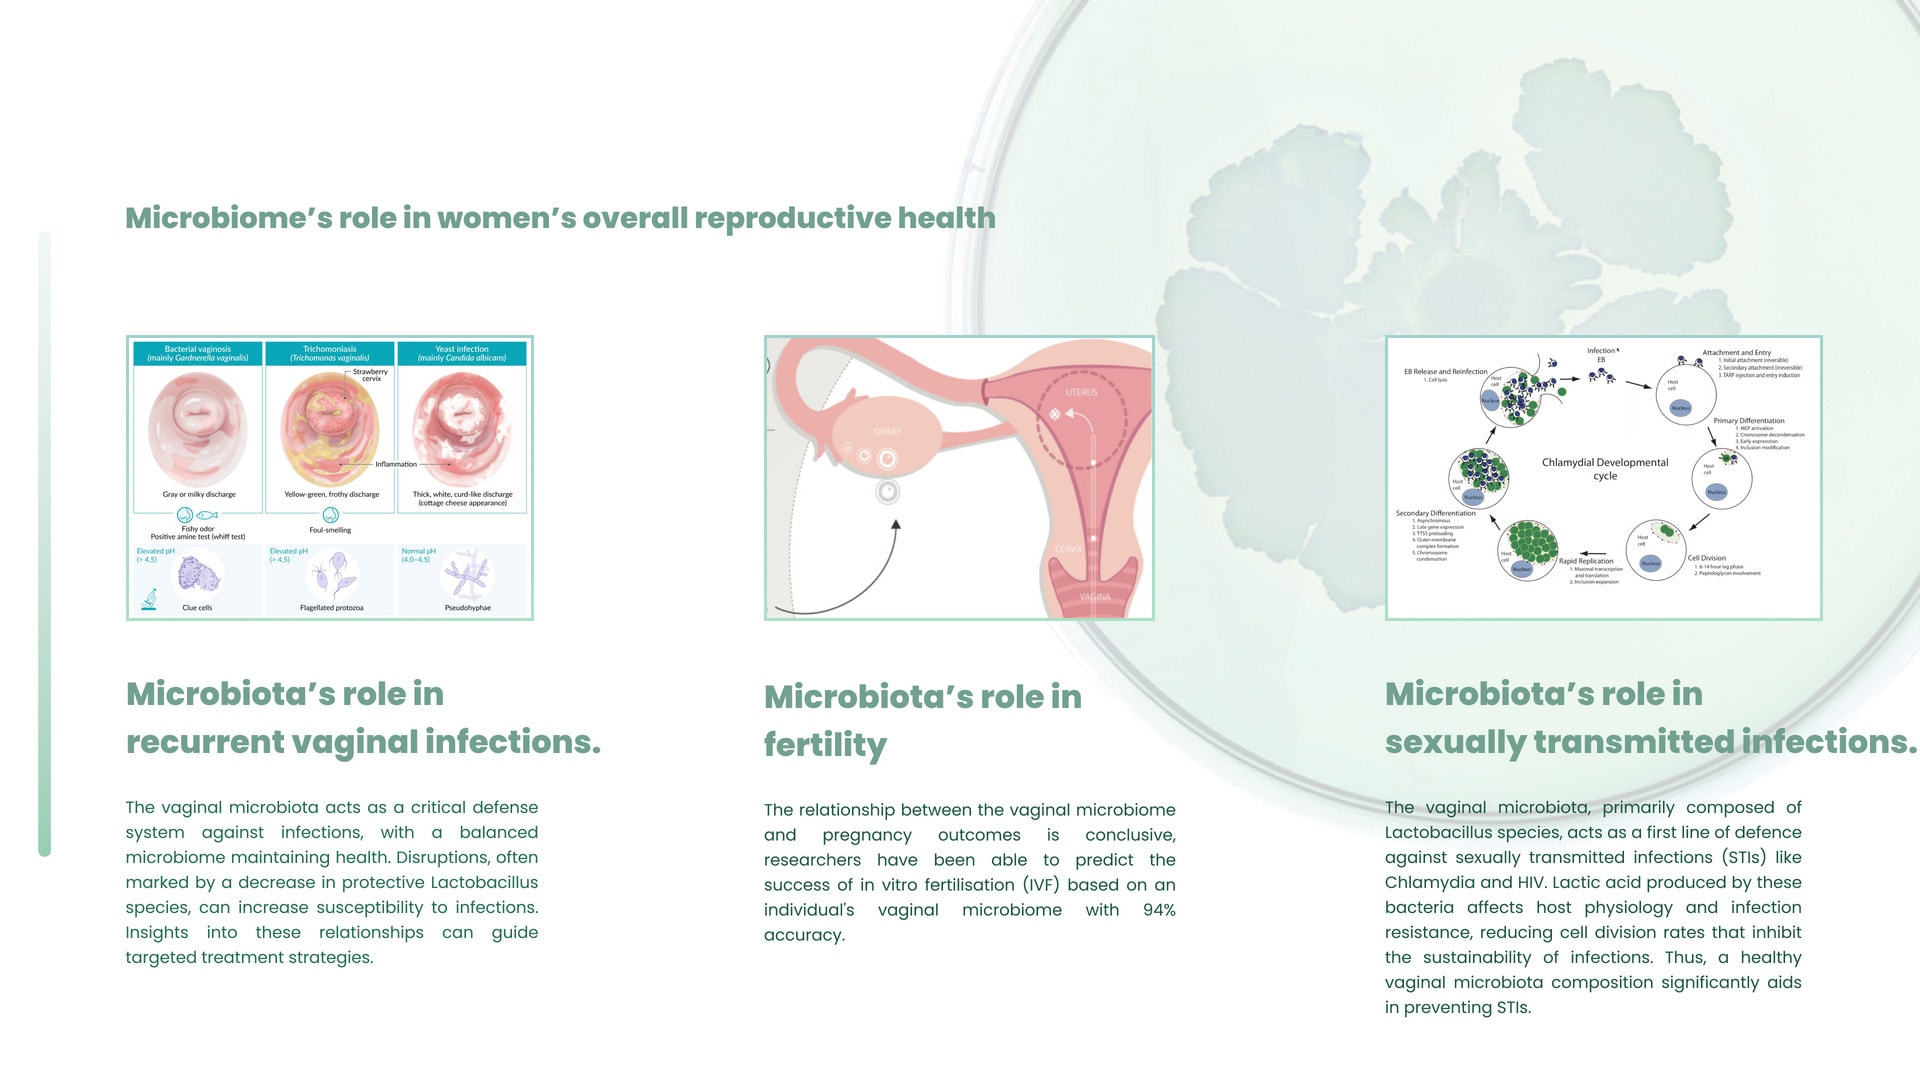 Microbiome’s role in women’s overall reproductive health